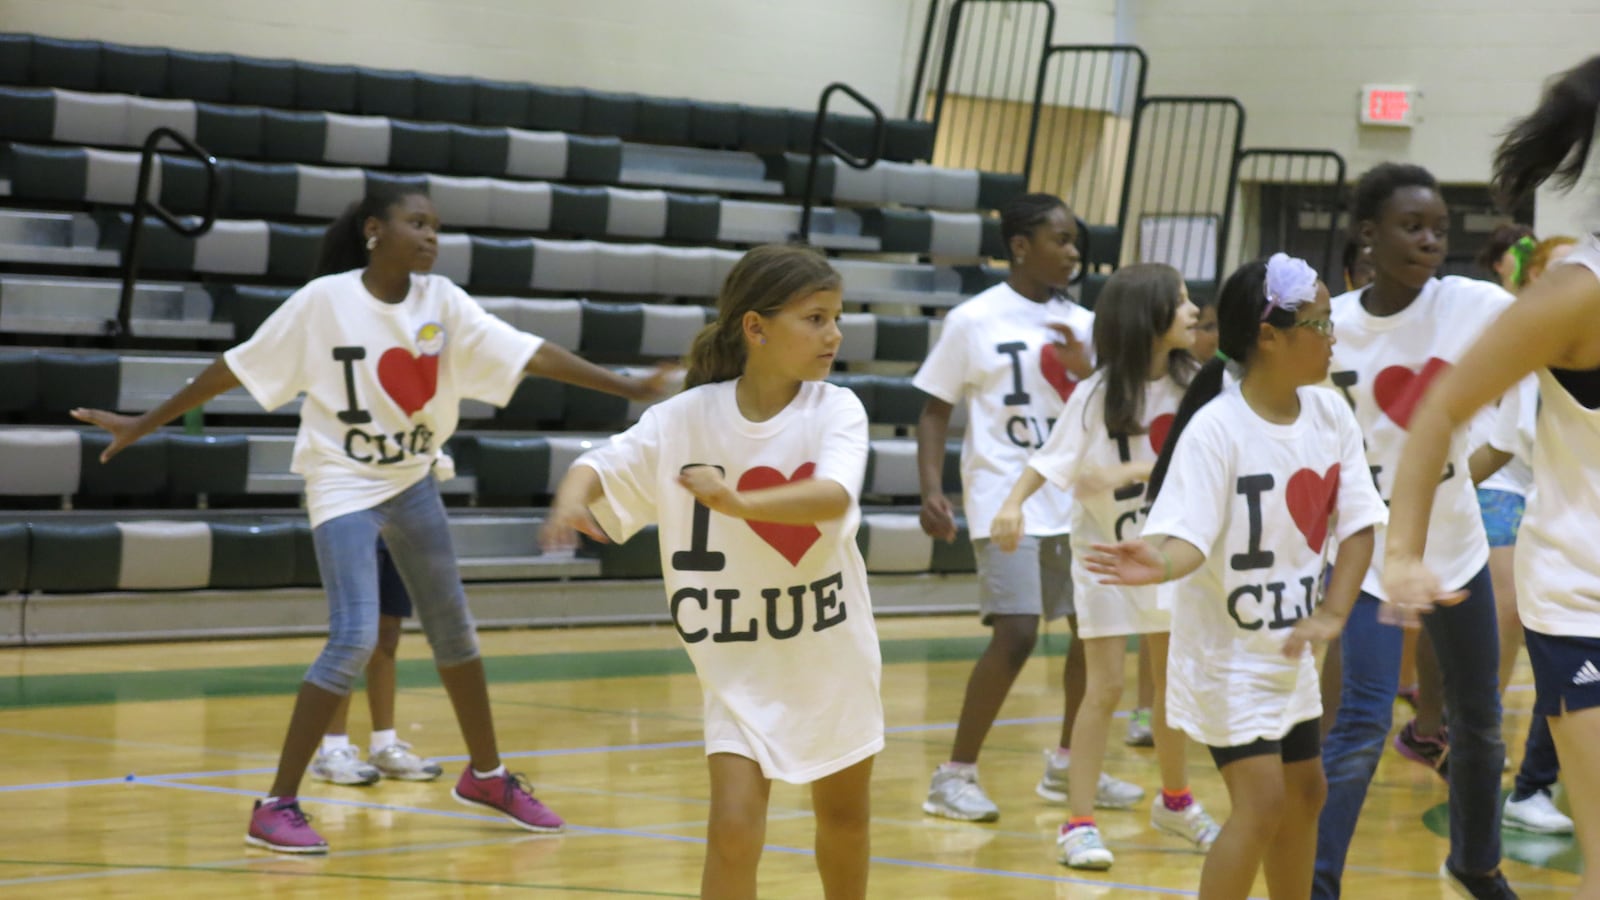 Students in Memphis attend a camp for CLUE, Shelby County's gifted program.